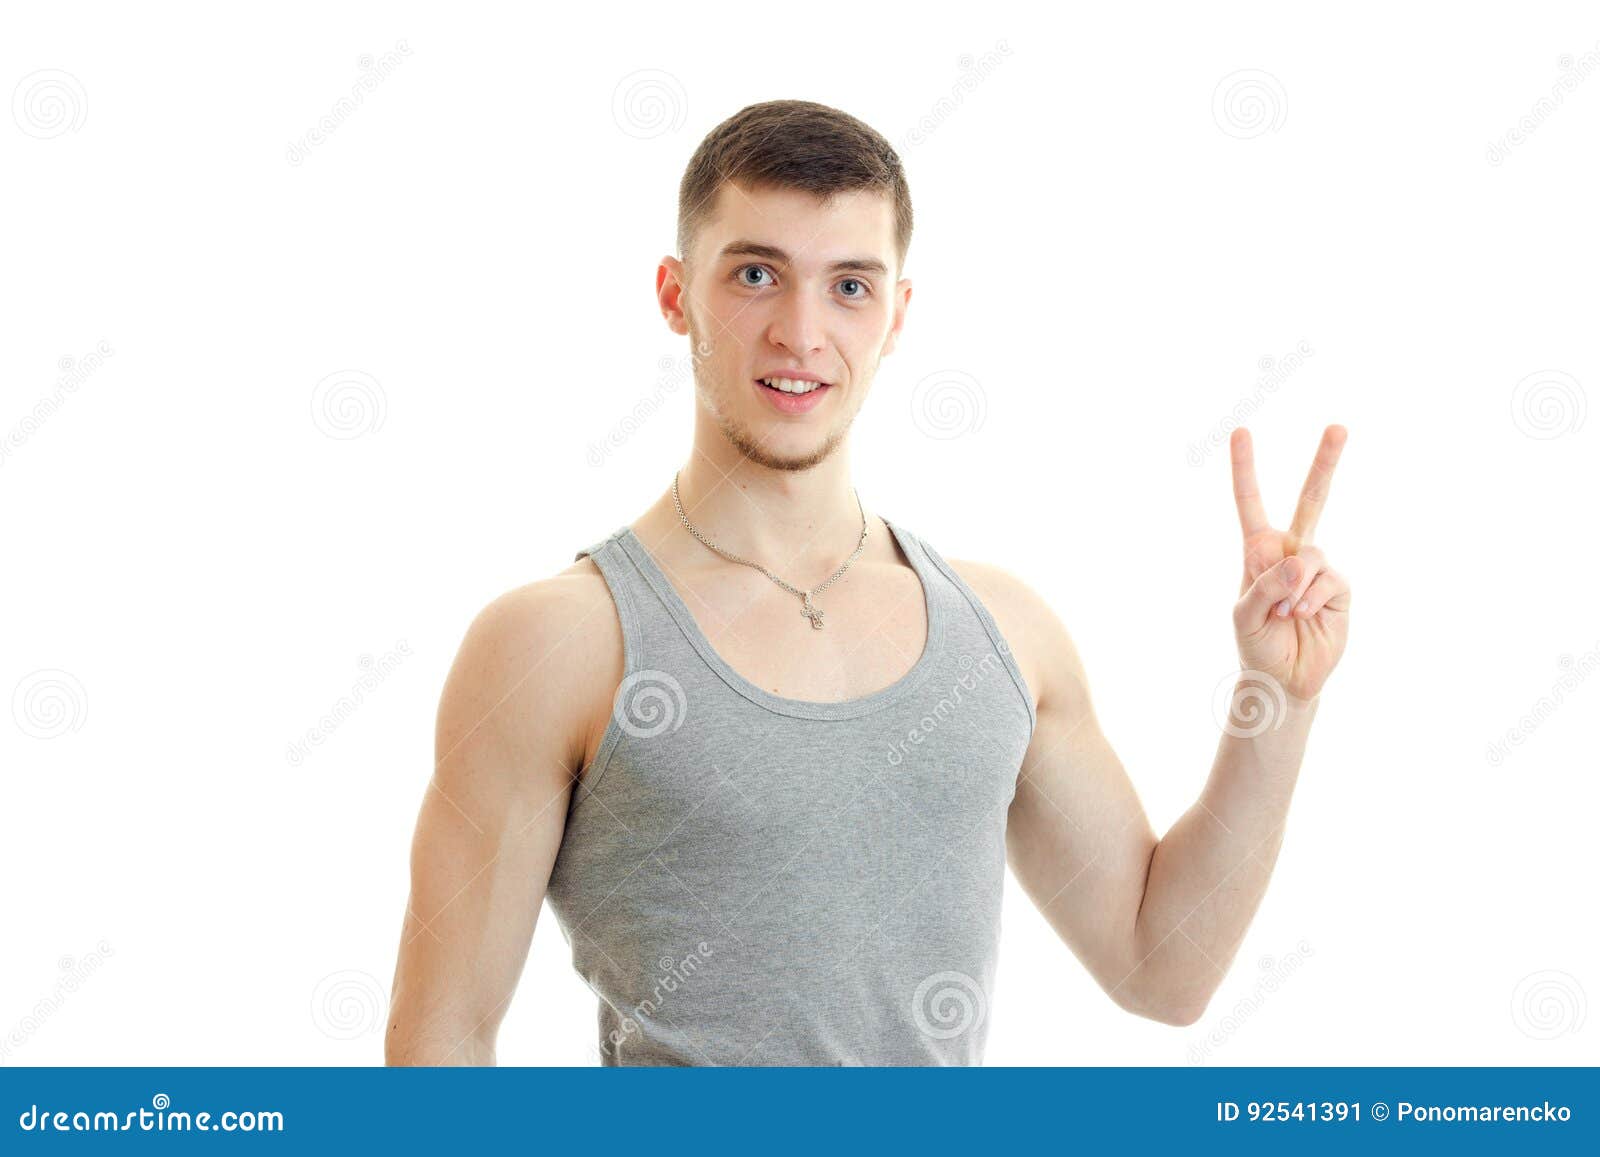 Guy Looks Into The Camera And Hand Gesture With Raised Up Two Fingers